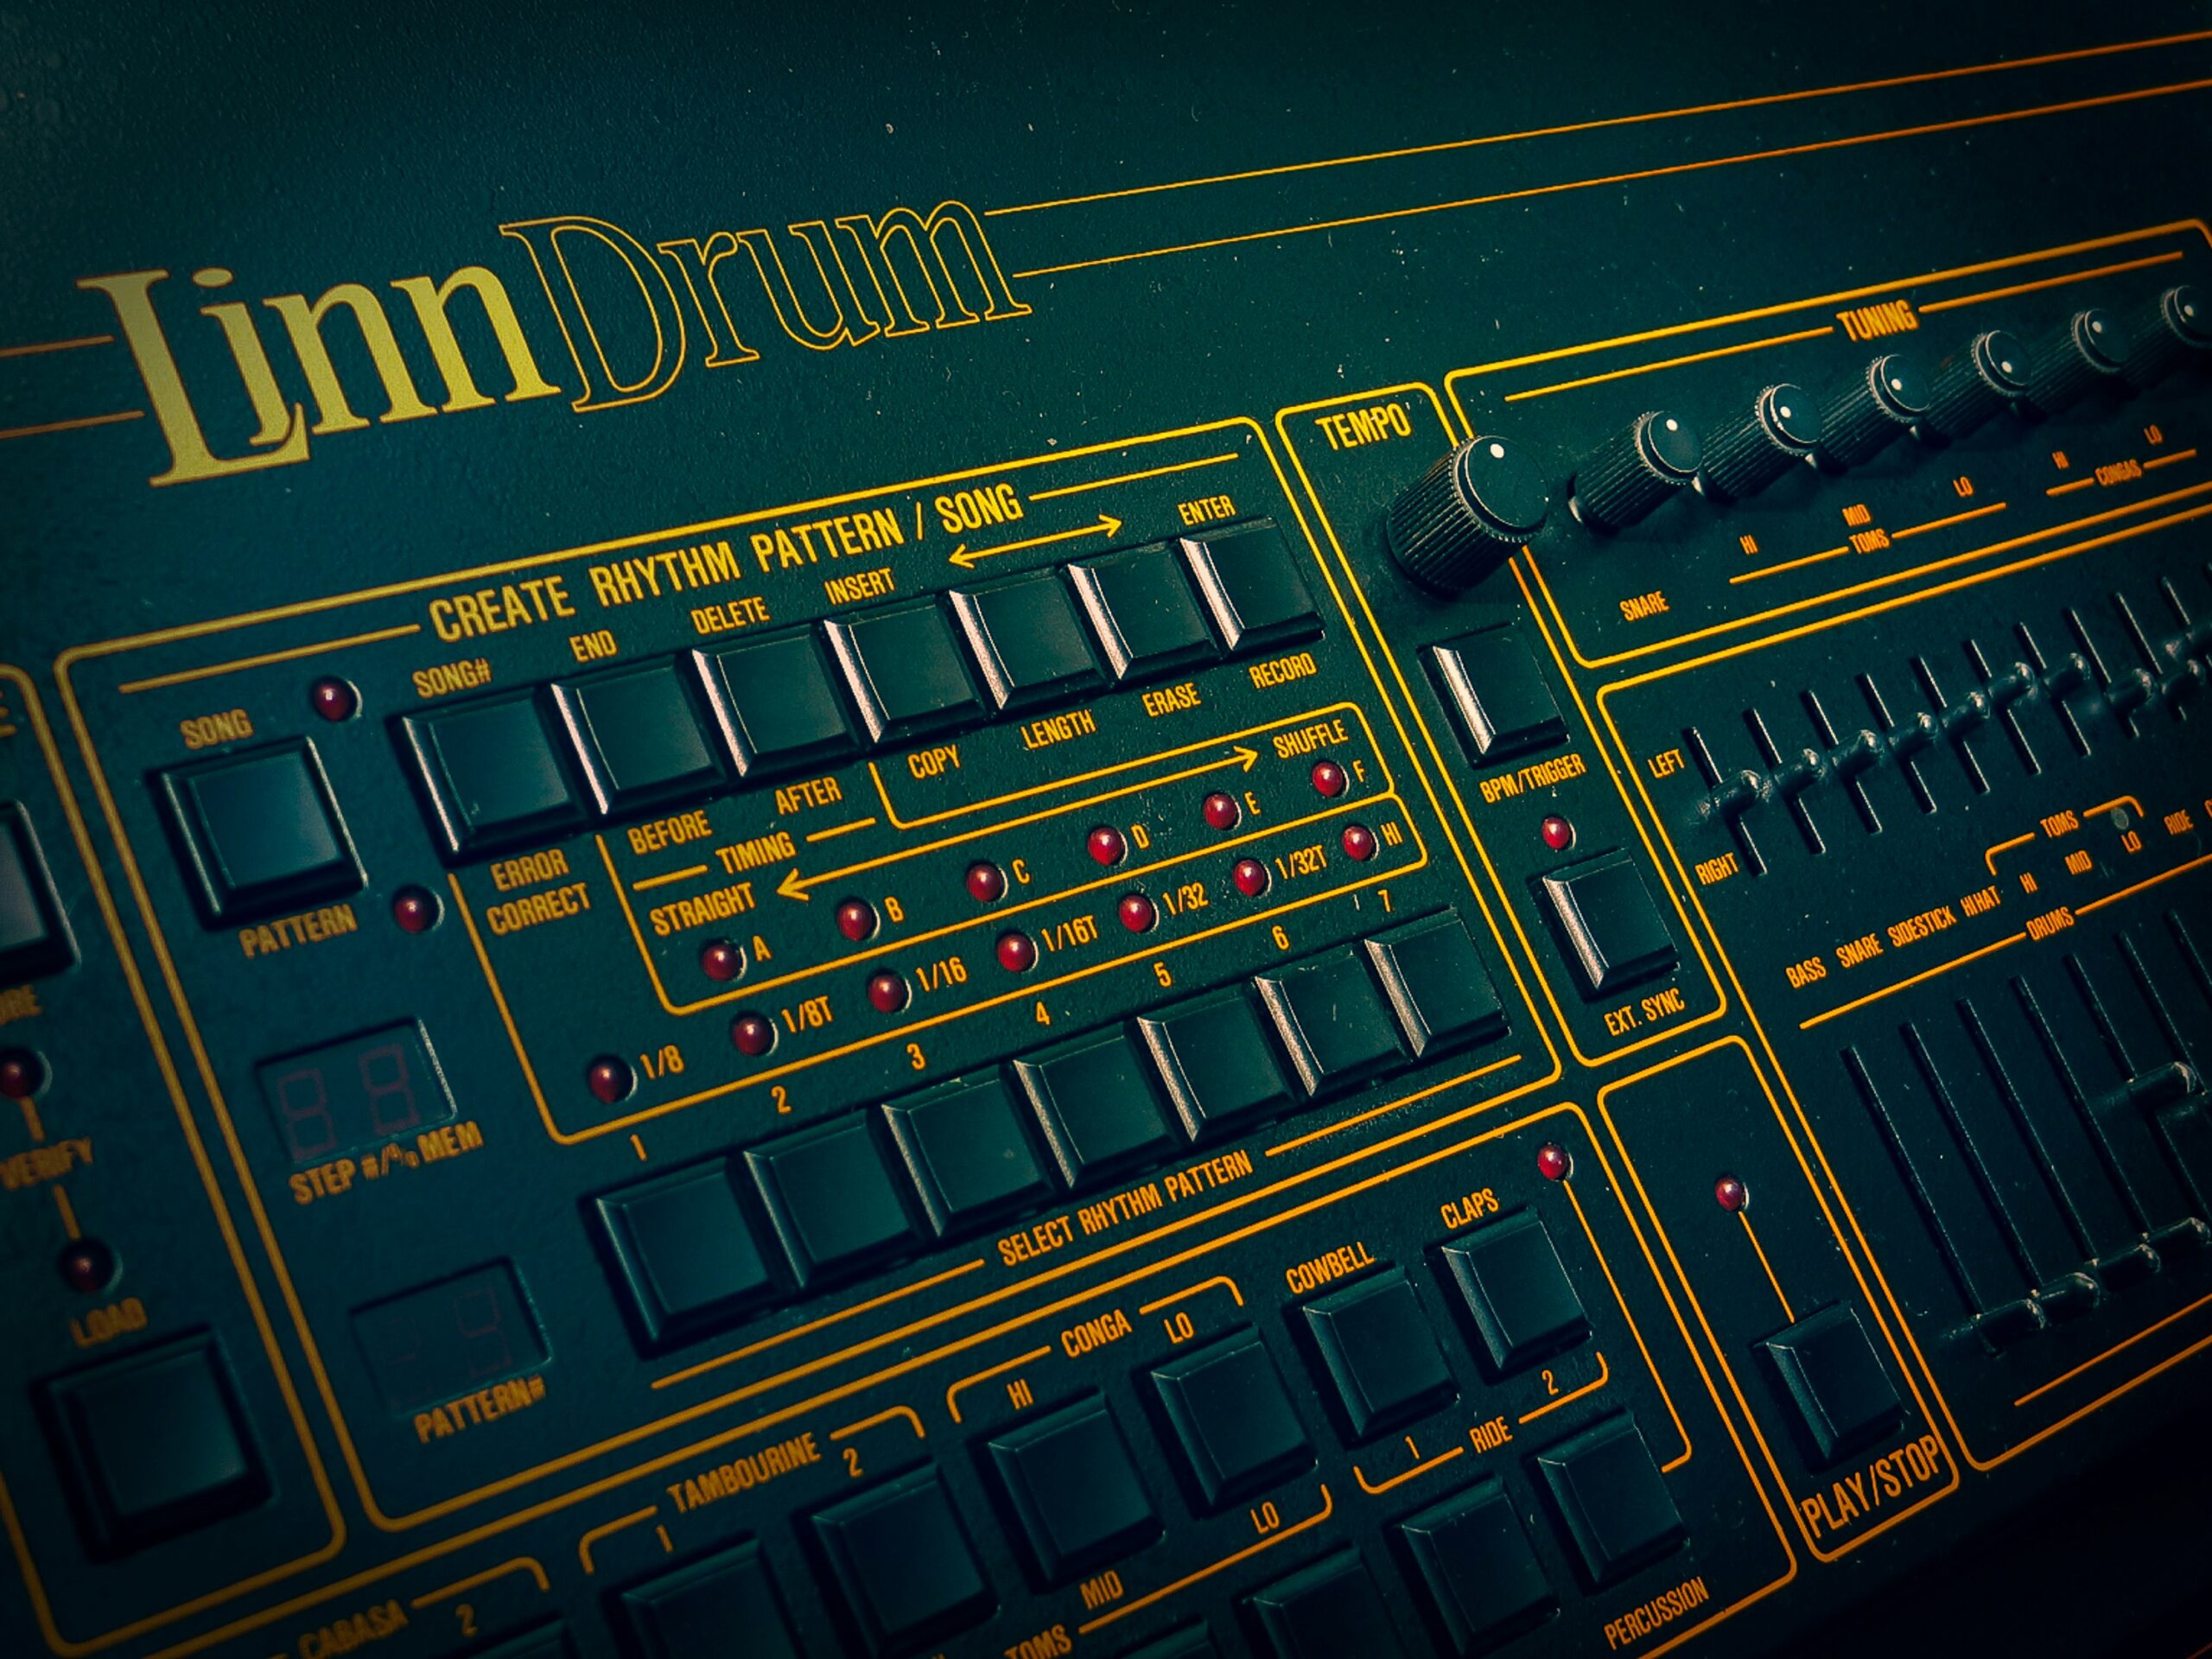 Linn Drum machine as used by Human League, Gary Numan and others